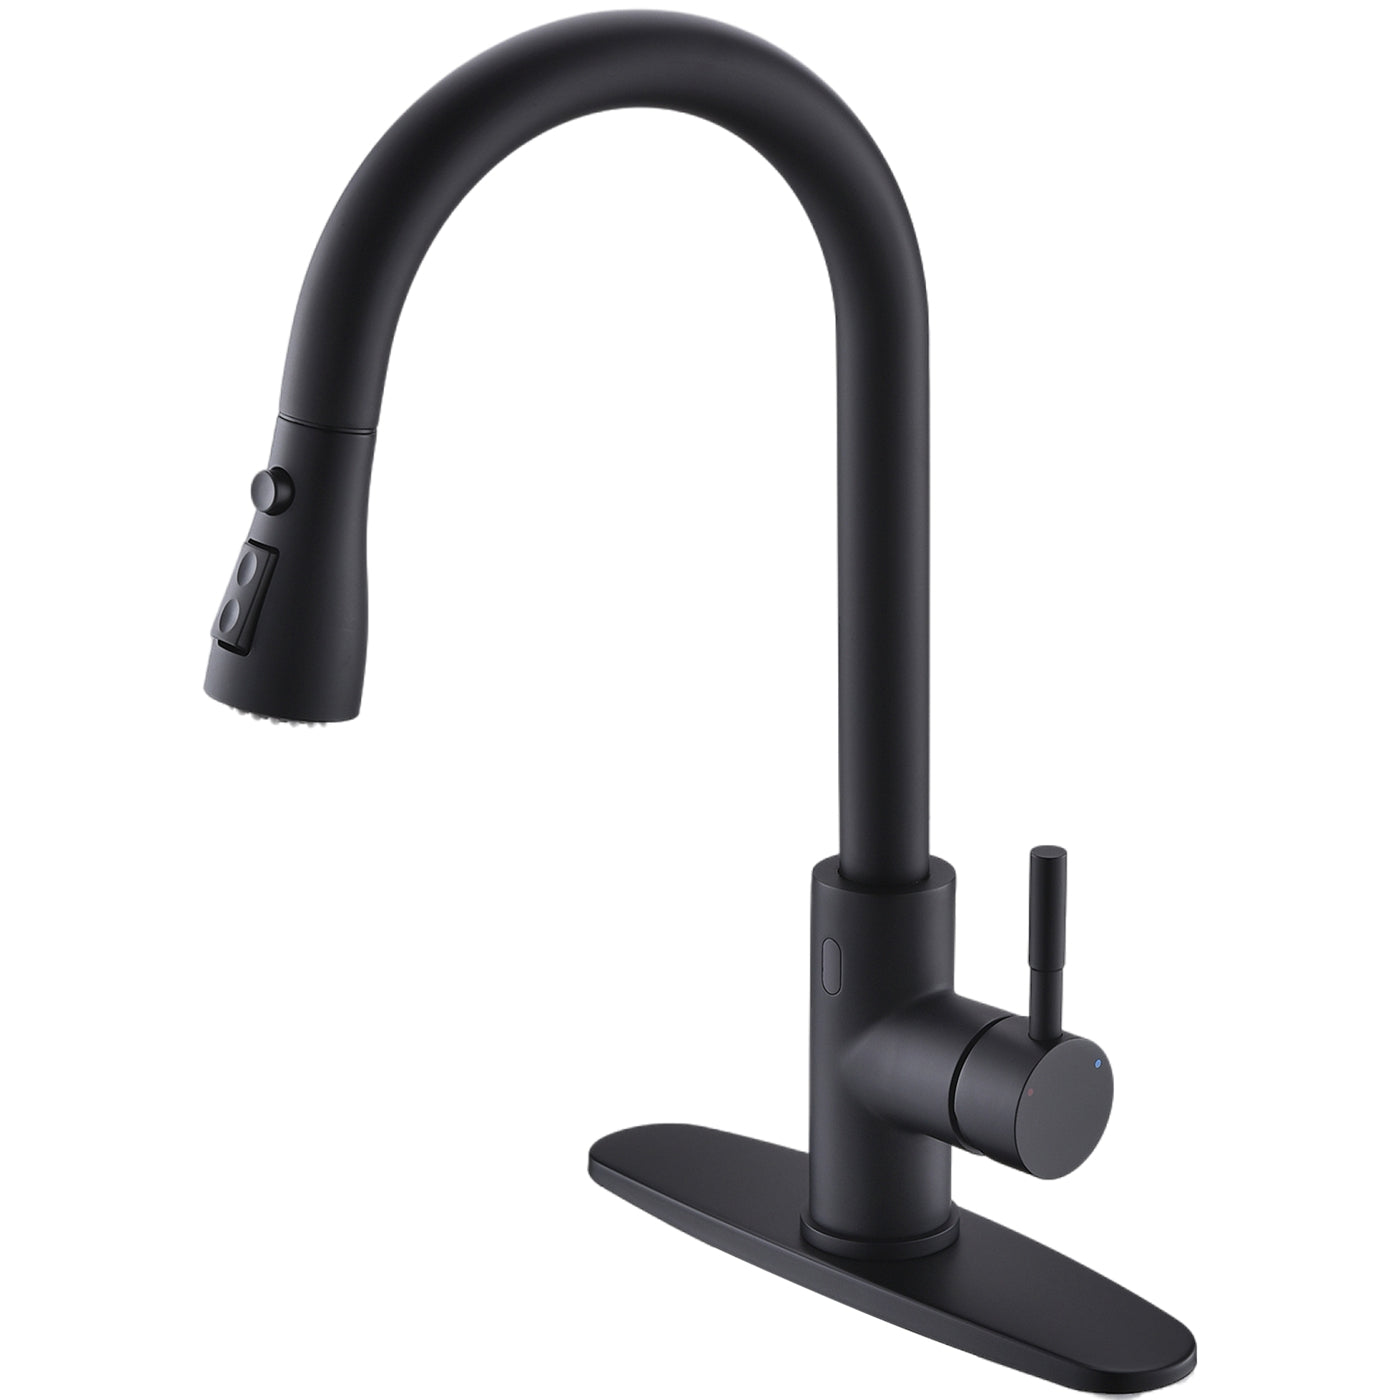 Single-Handle Touchless/Touch On Pull-Down Sprayer 2 Spray High Arc Kitchen Faucet with Deck Plate